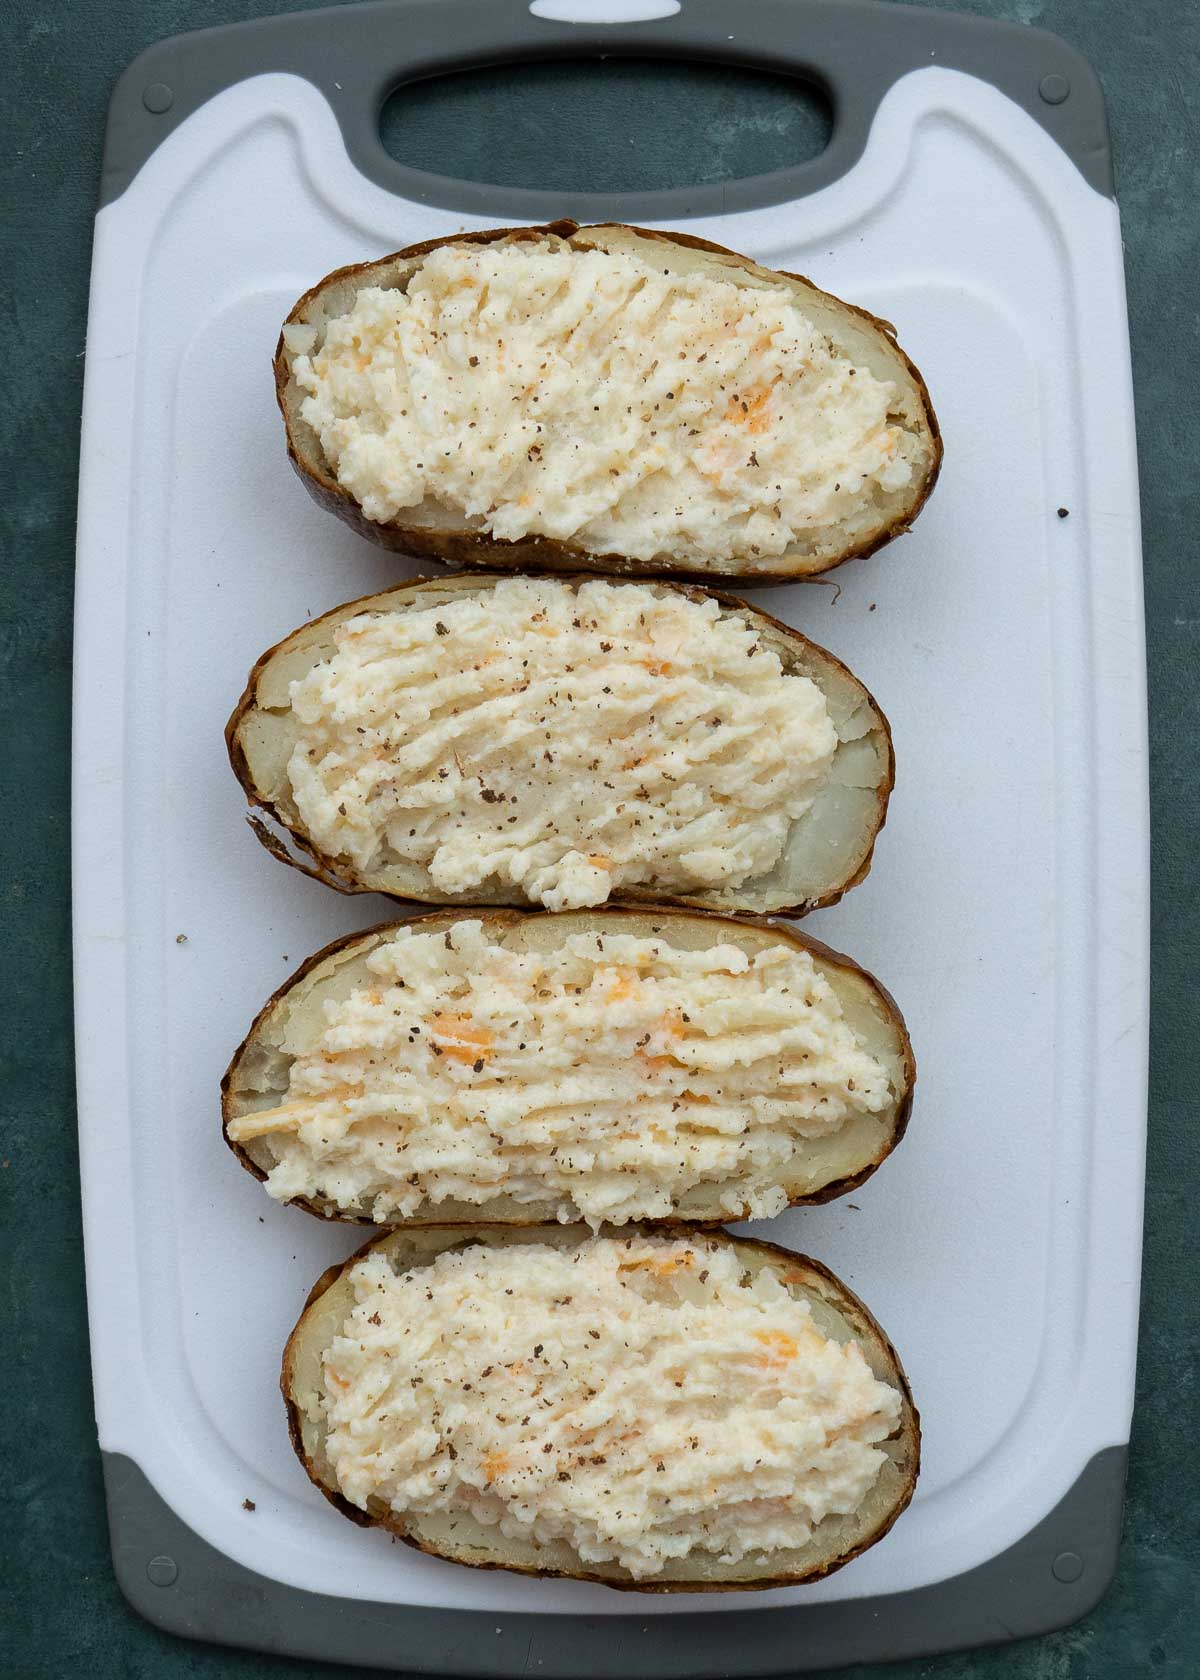 scoop the creamy, well-mixed filling into the hollowed potato skins